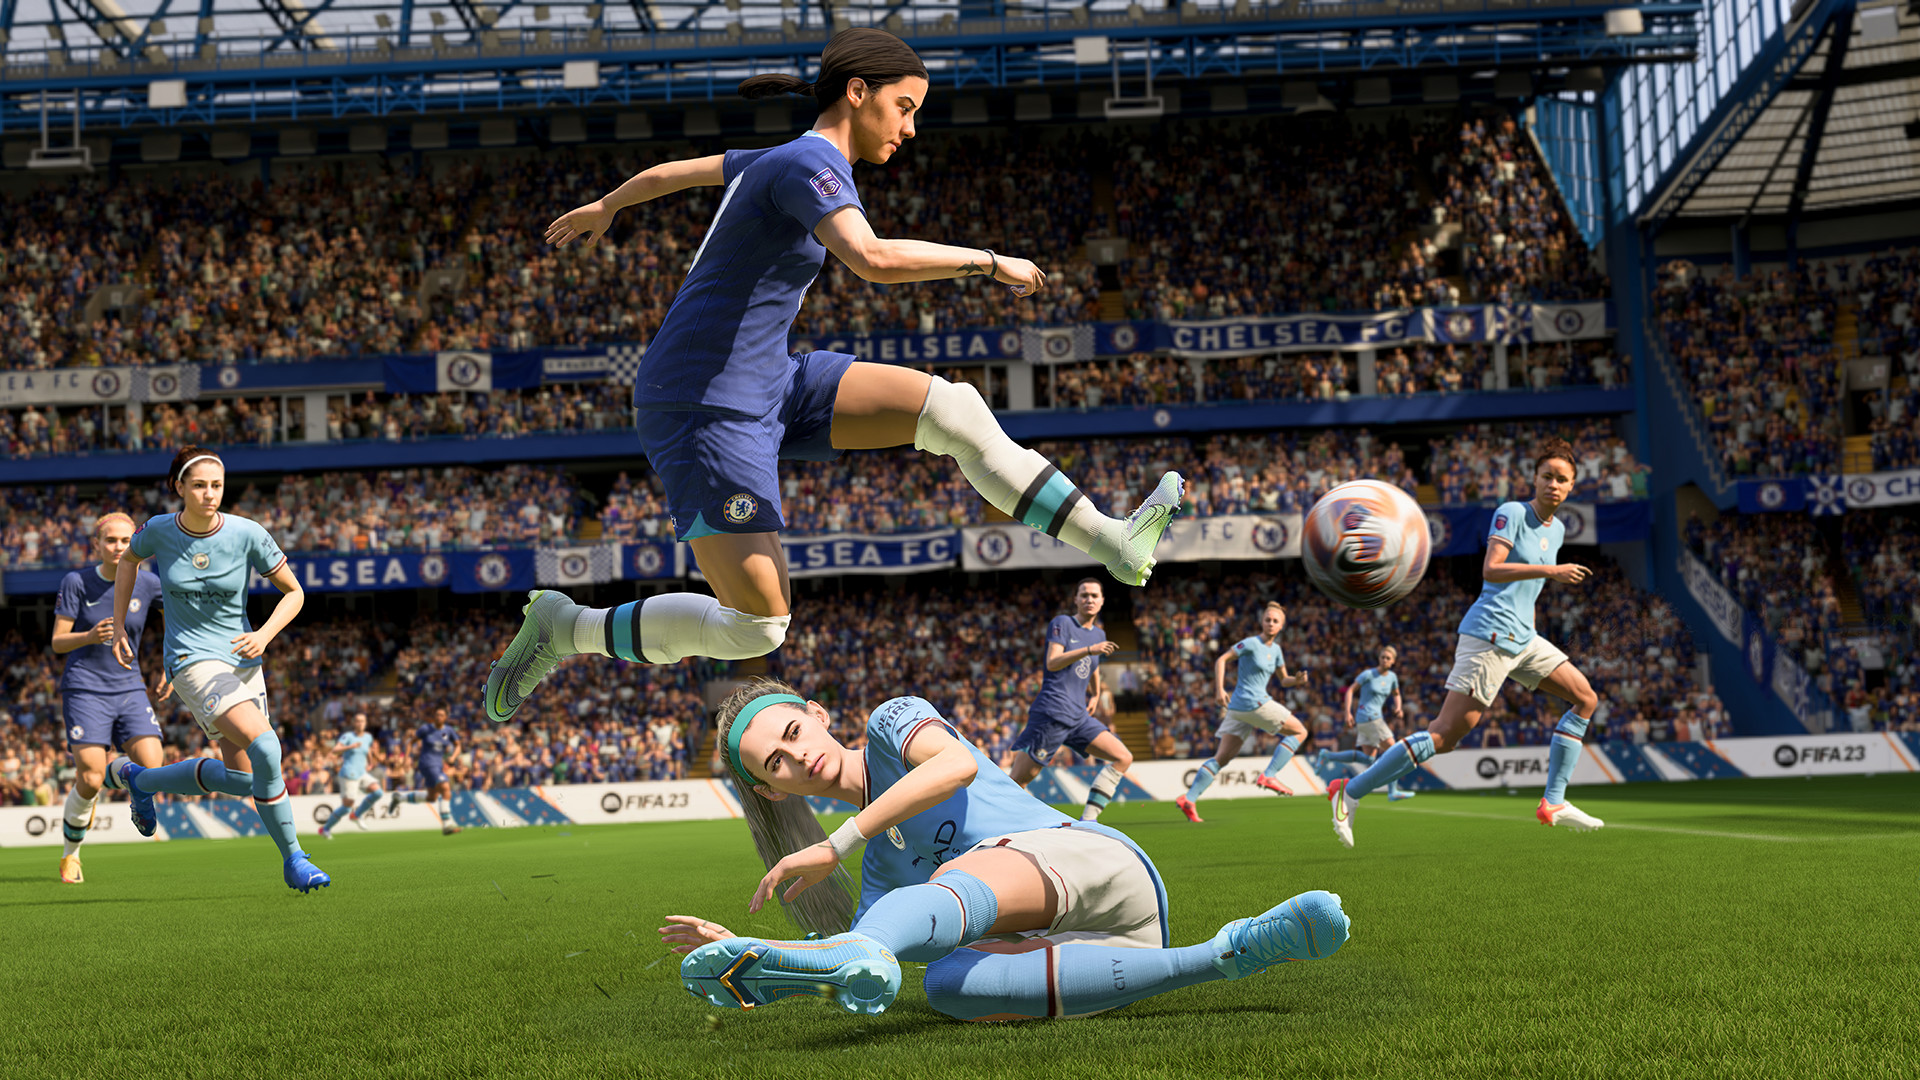 EA Announced Its Anti-Cheat Solution to Be Released with FIFA 23